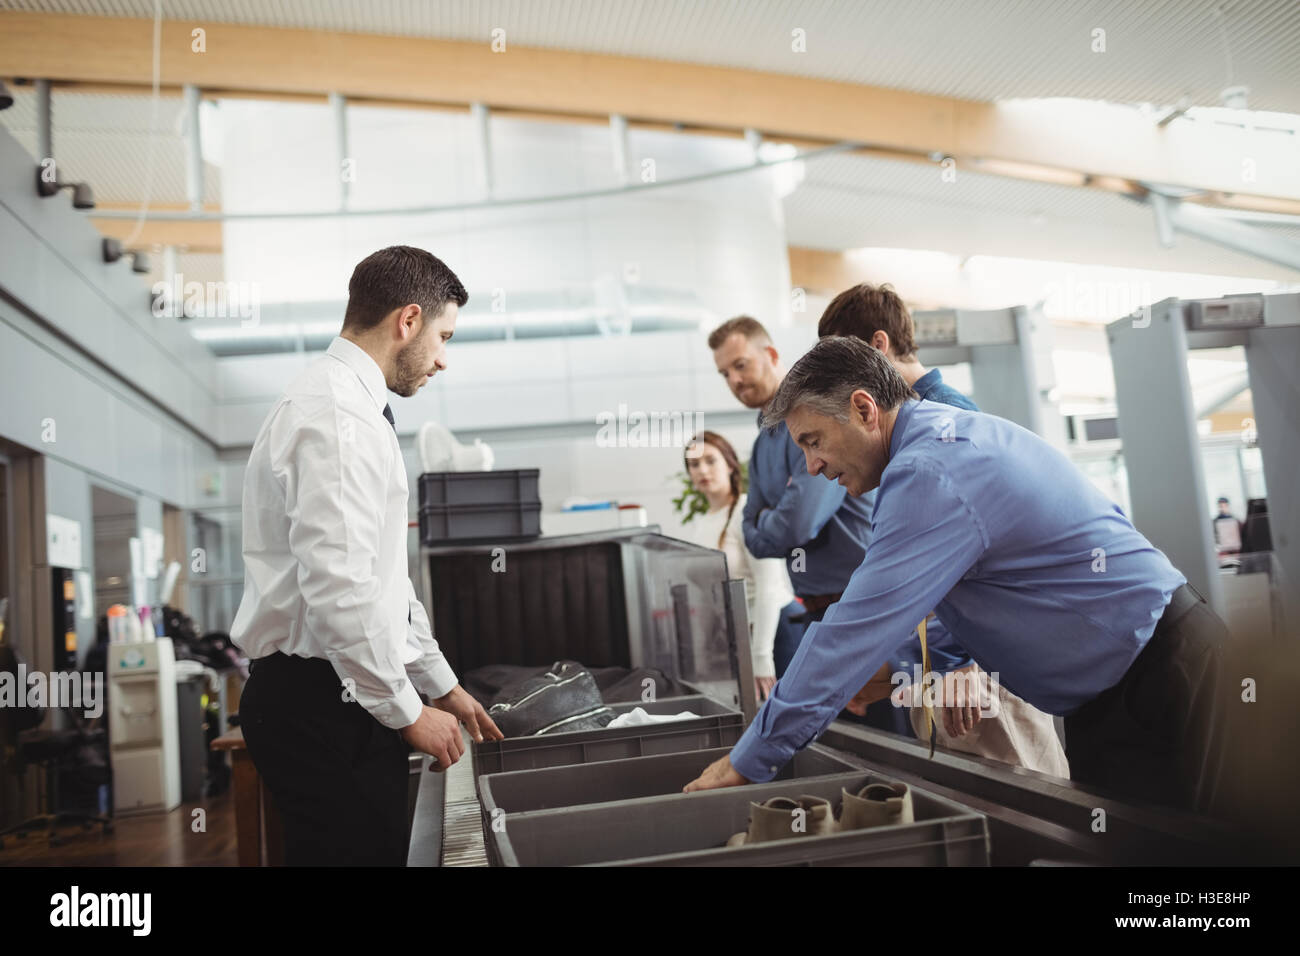 Passengers in airport security check Stock Photo